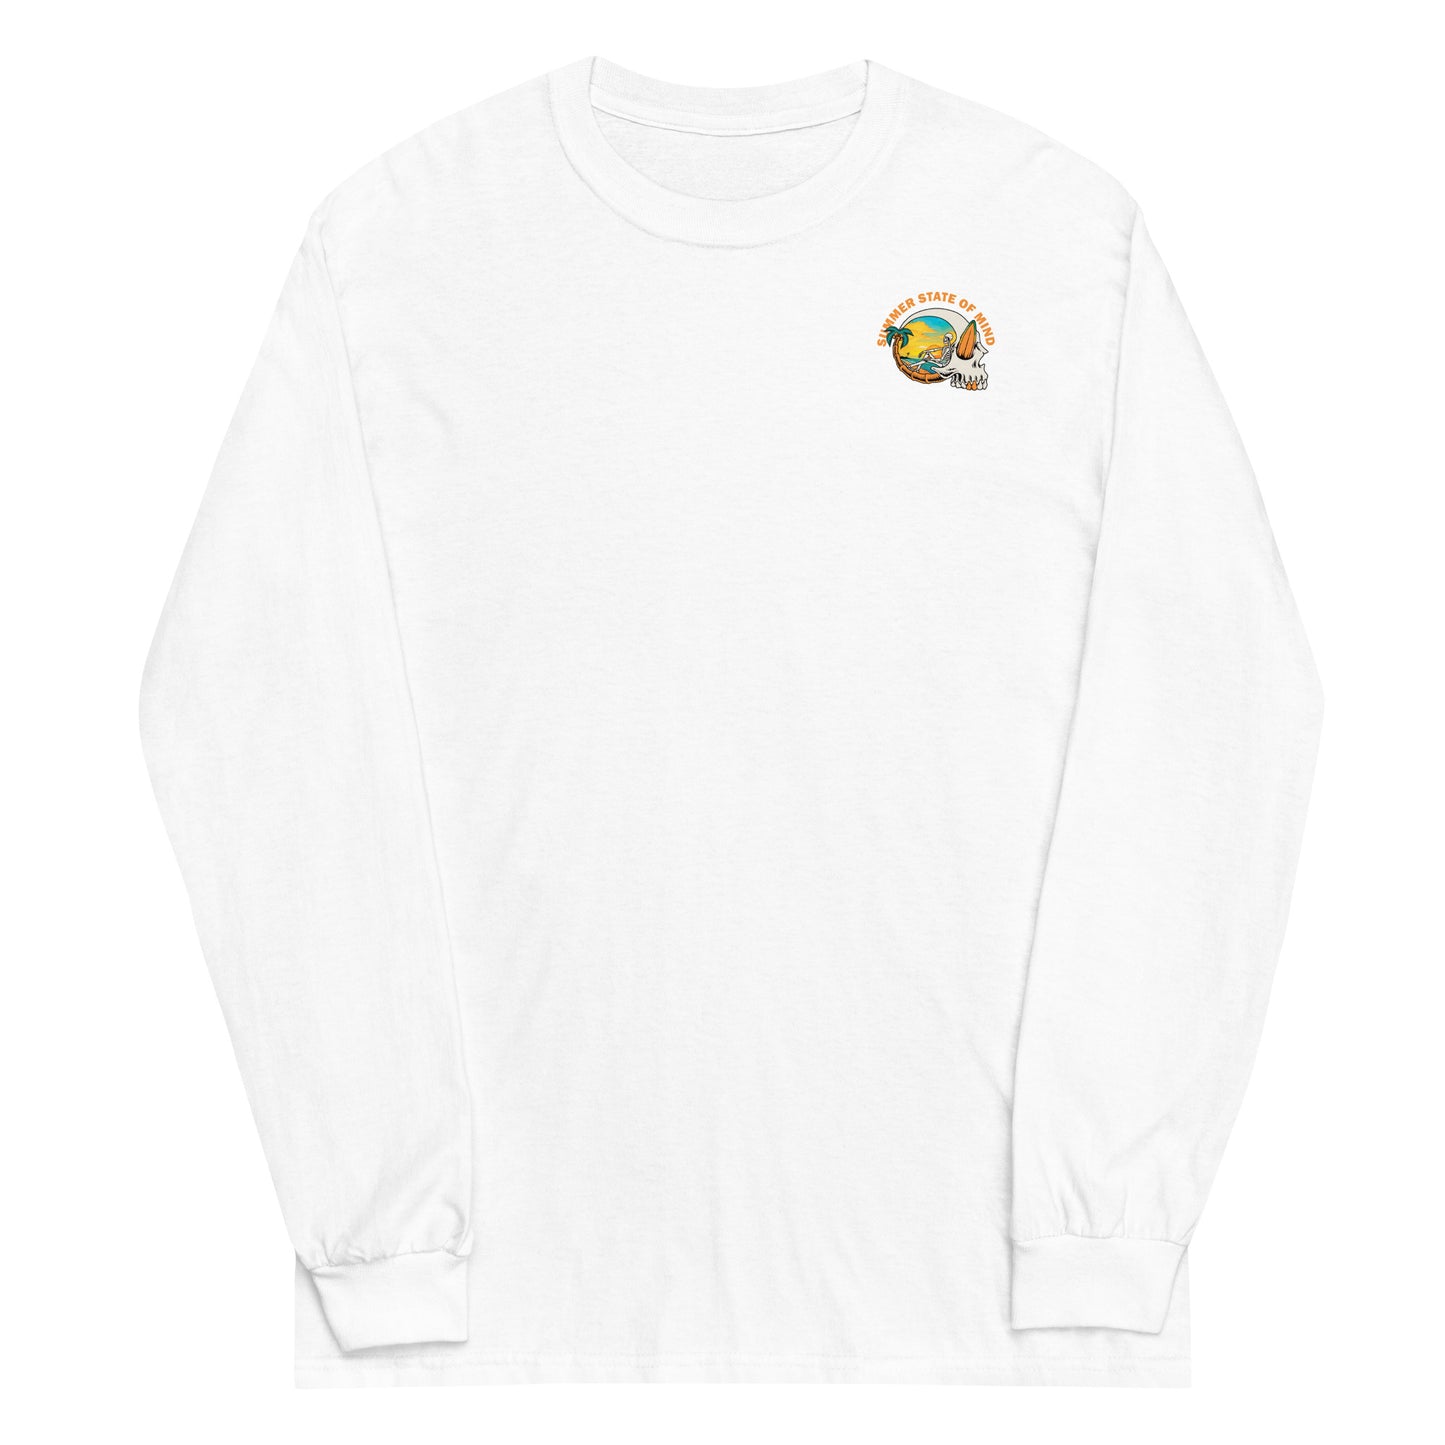 State Of Mind Long Sleeve Shirt